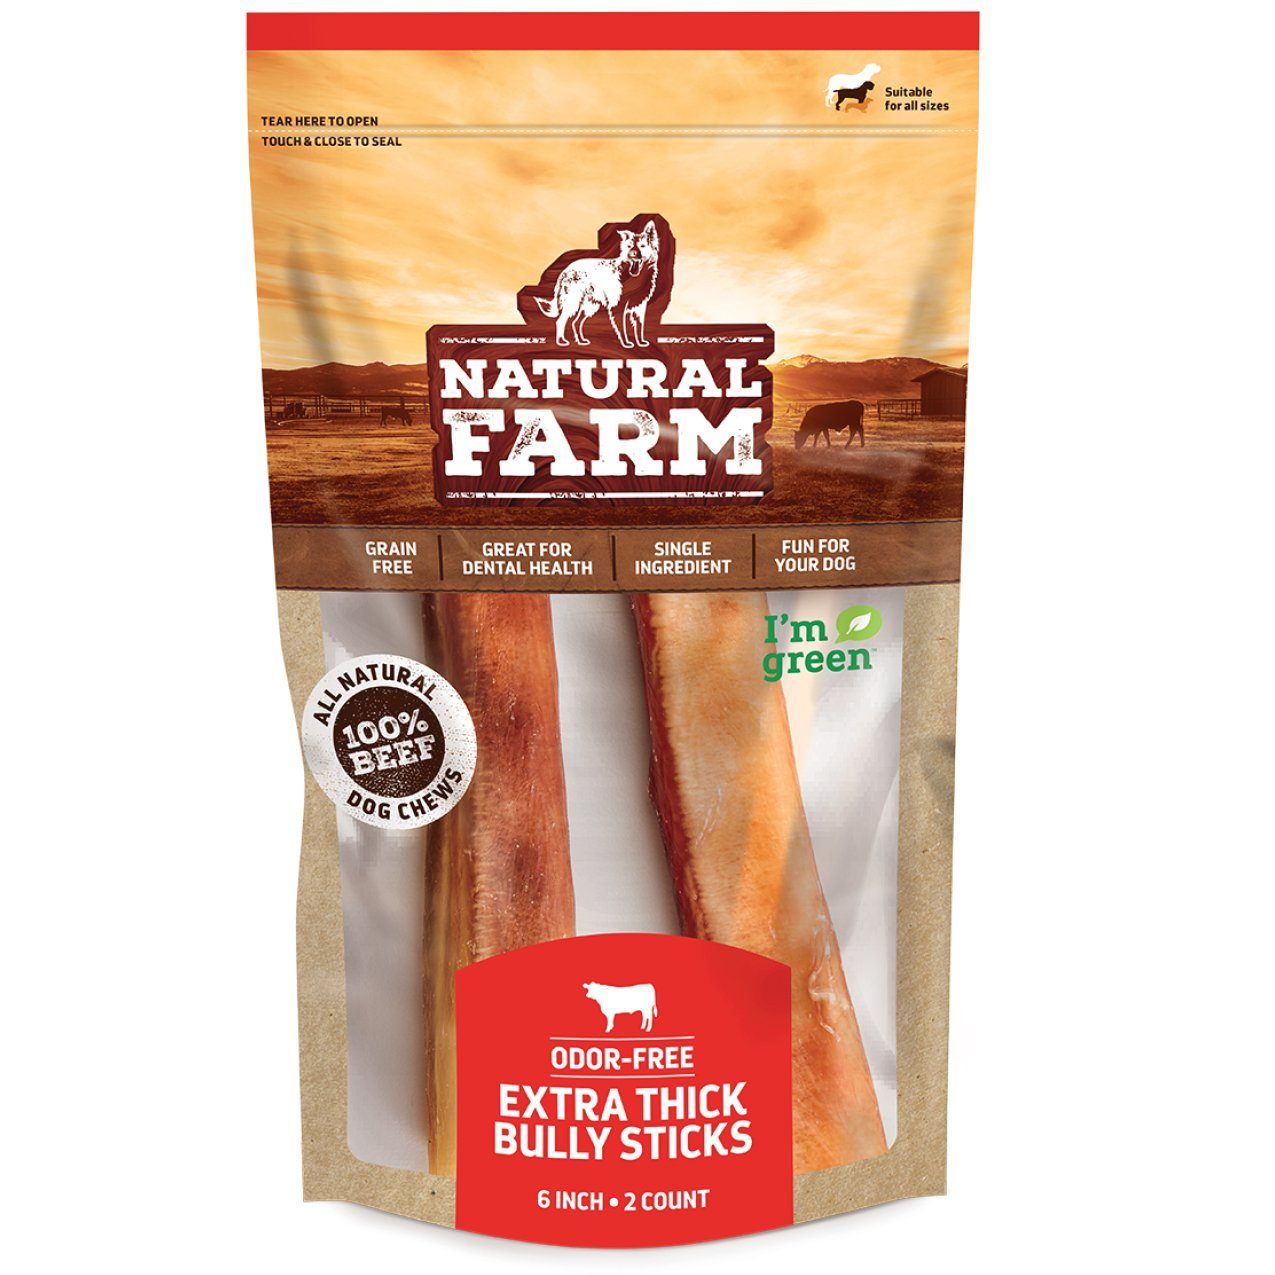 Extra Thick Bully Sticks - 6 Inch